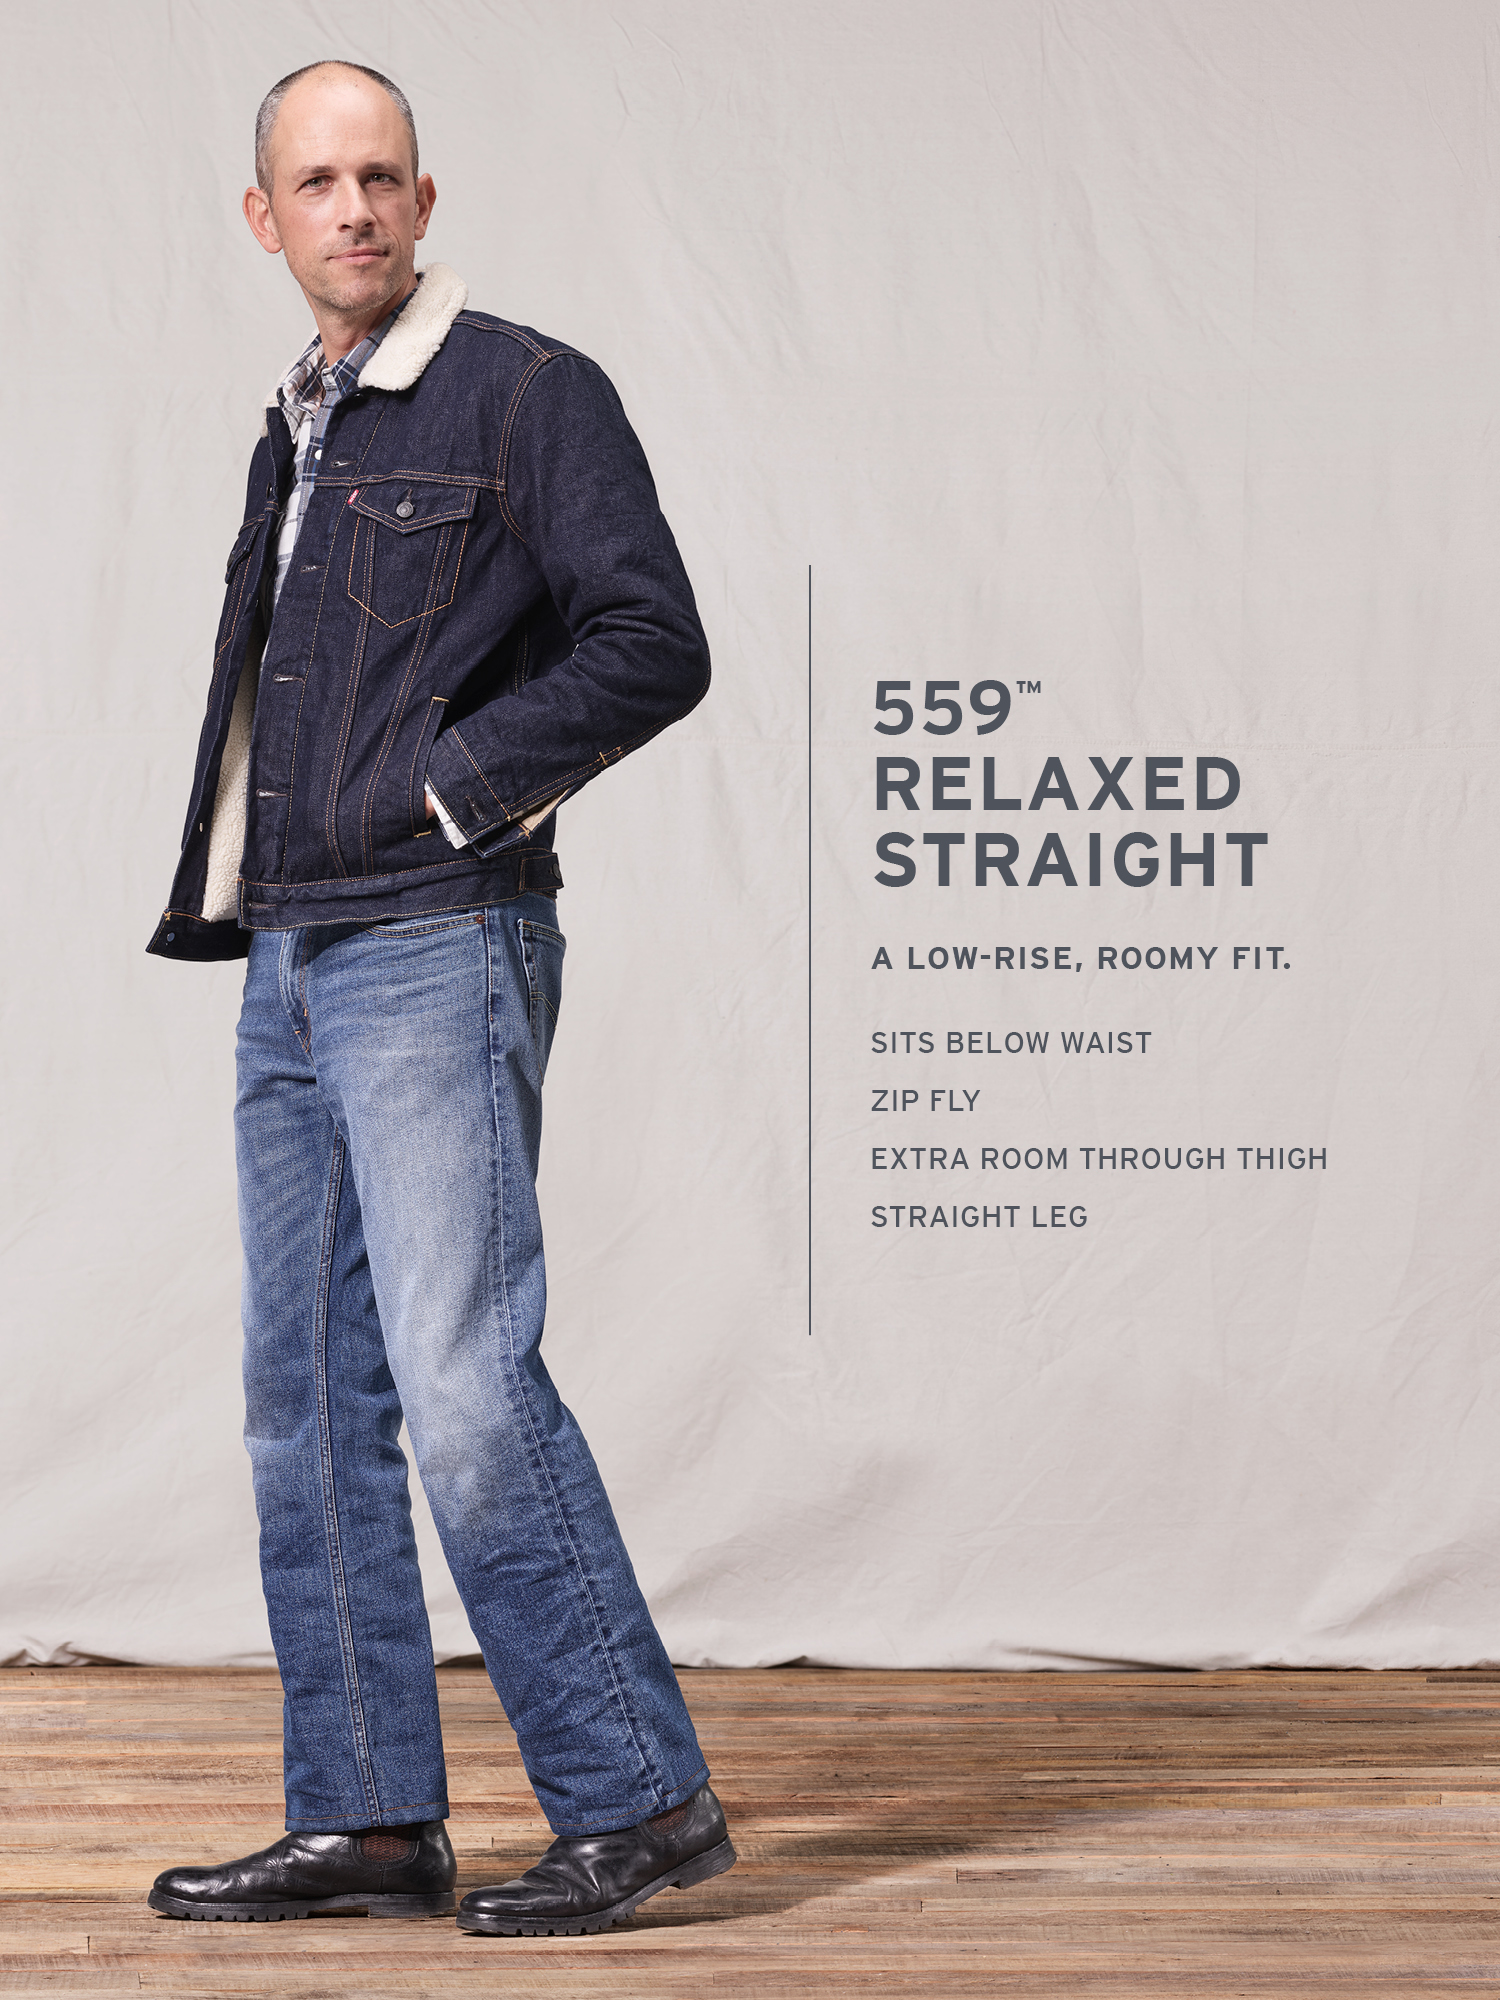 Levi's Men's 559 Relaxed Straight Fit Jeans - image 5 of 7